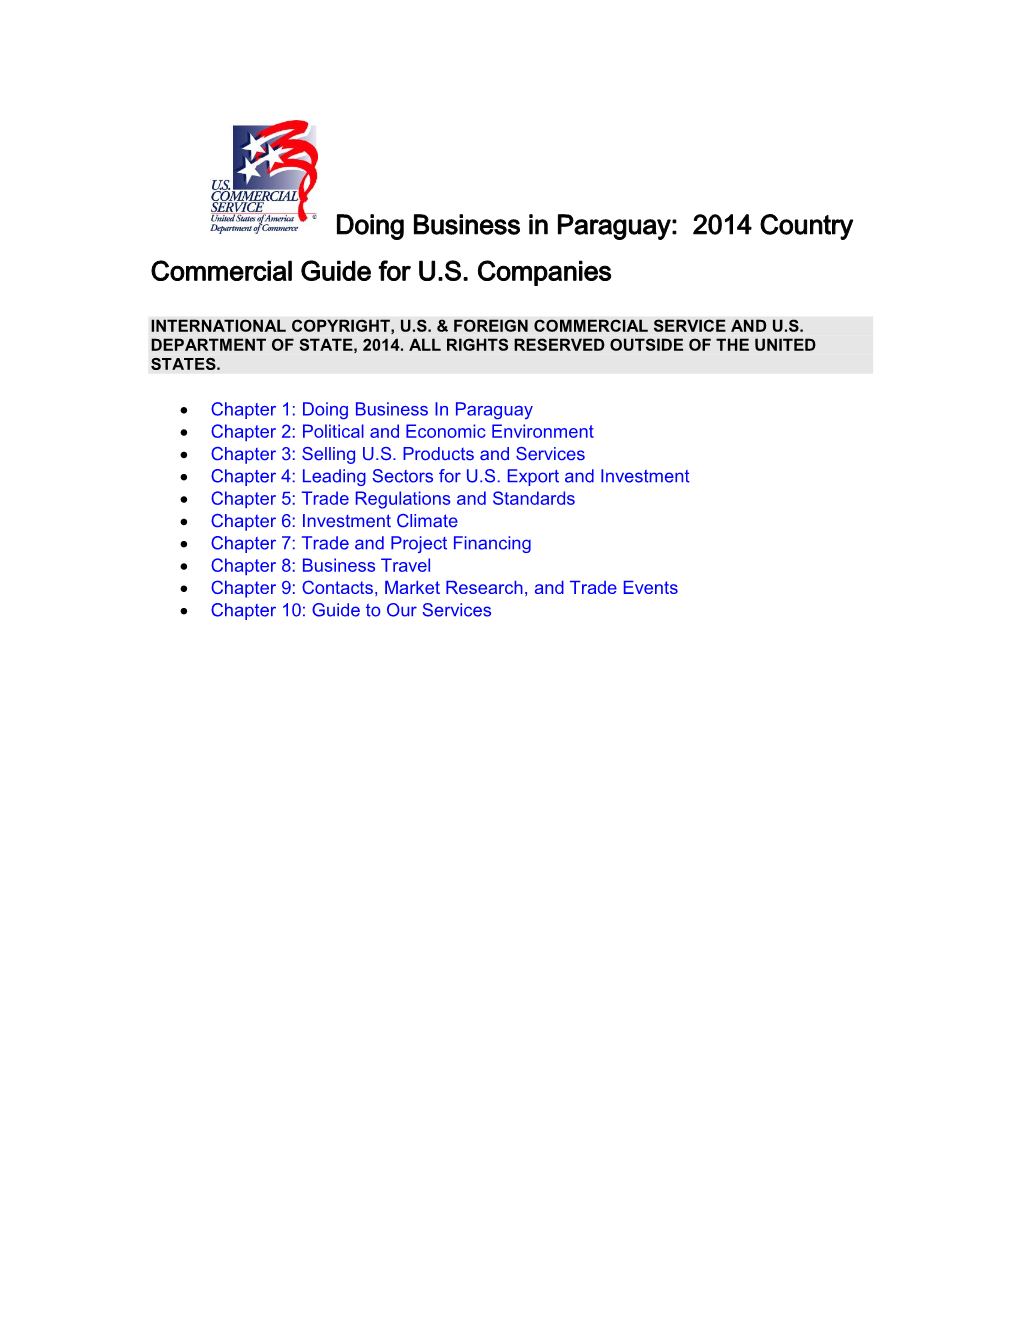 Doing Business in Paraguay: 2014 Country Commercial Guide for U.S